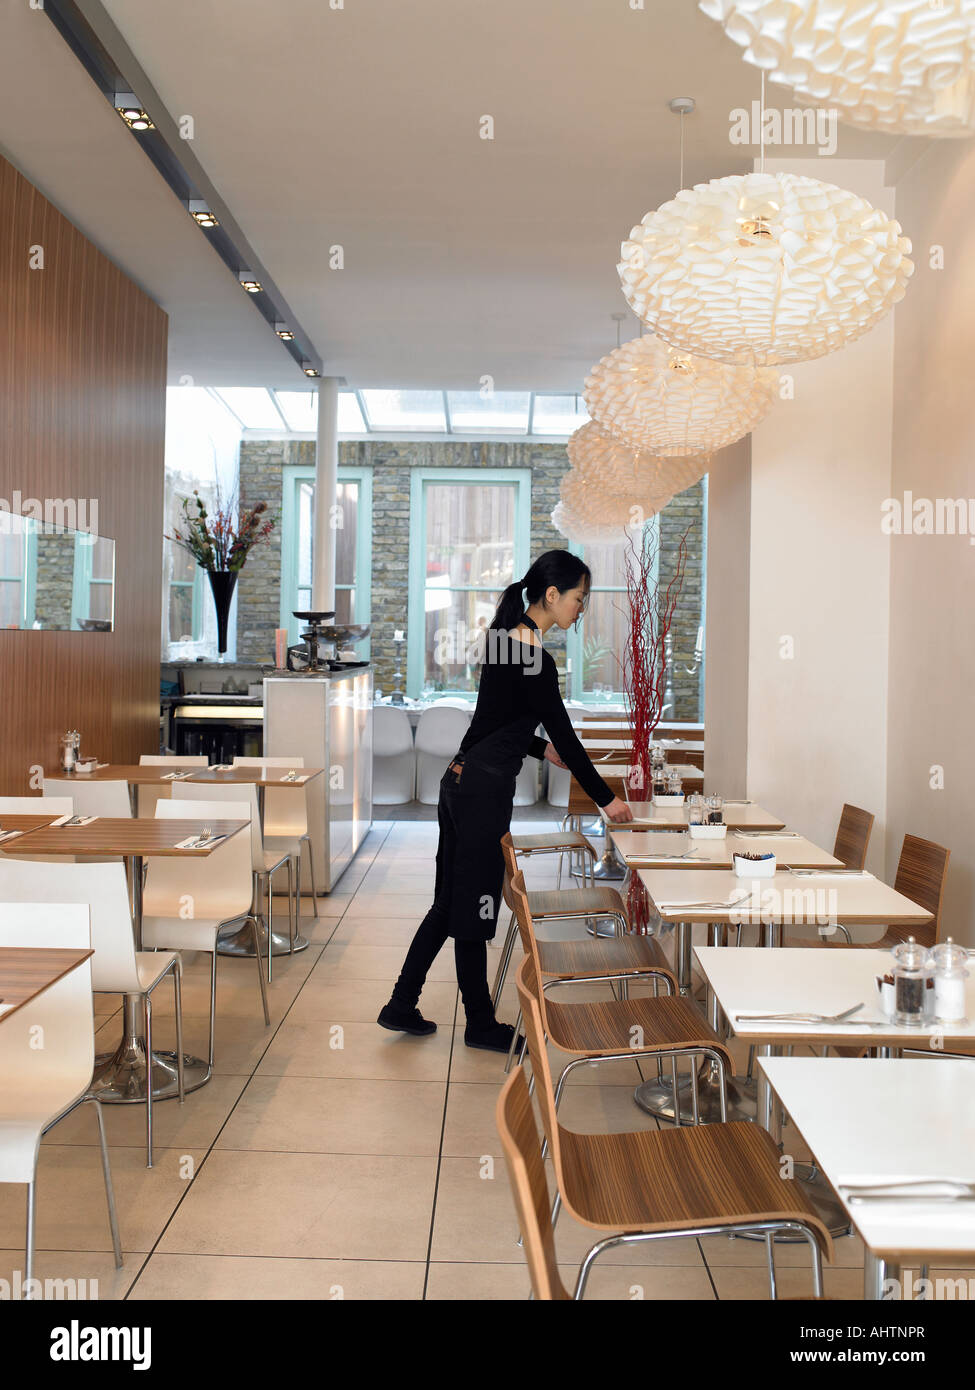 Young waitress setting tables in empty restaurant Stock Photo